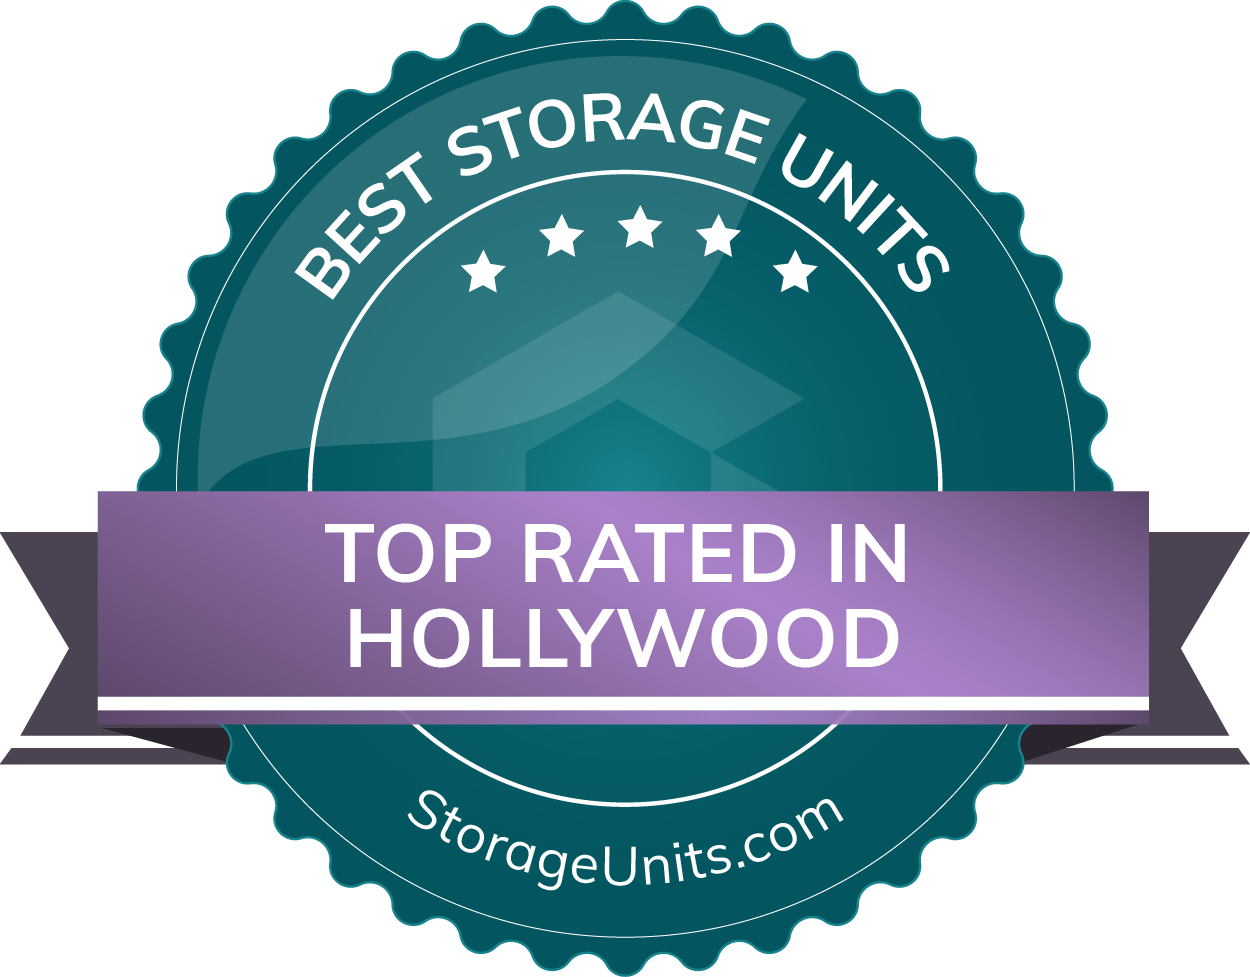 Best Self Storage Units in Hollywood, Florida of 2022